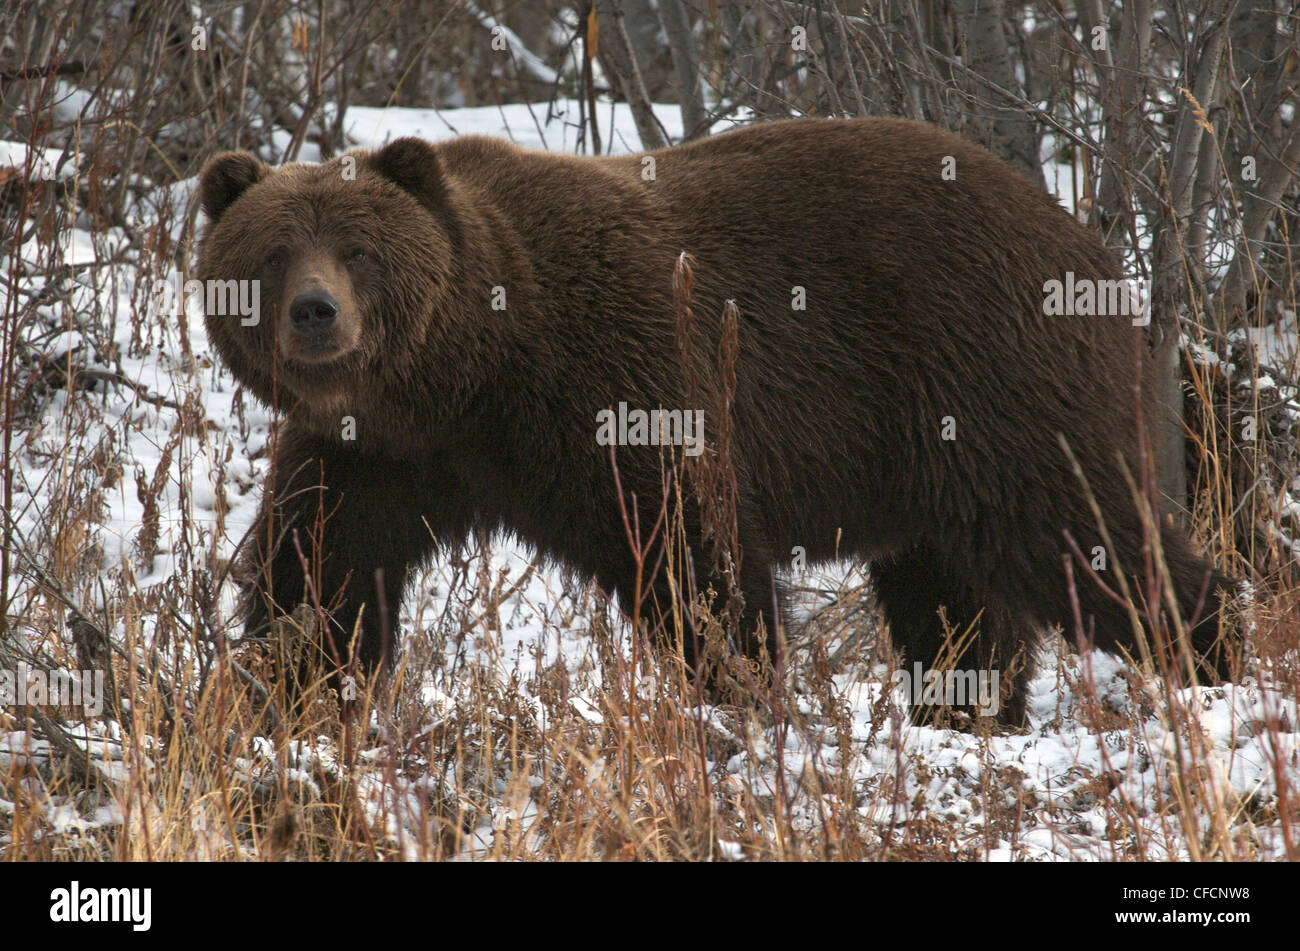 Grizzly Bear-Large Male (Ursus arctos) along Fishing Branch River, Ni'iinlii Njik Ecological Reserve, Yukon Territory, Canada Stock Photo